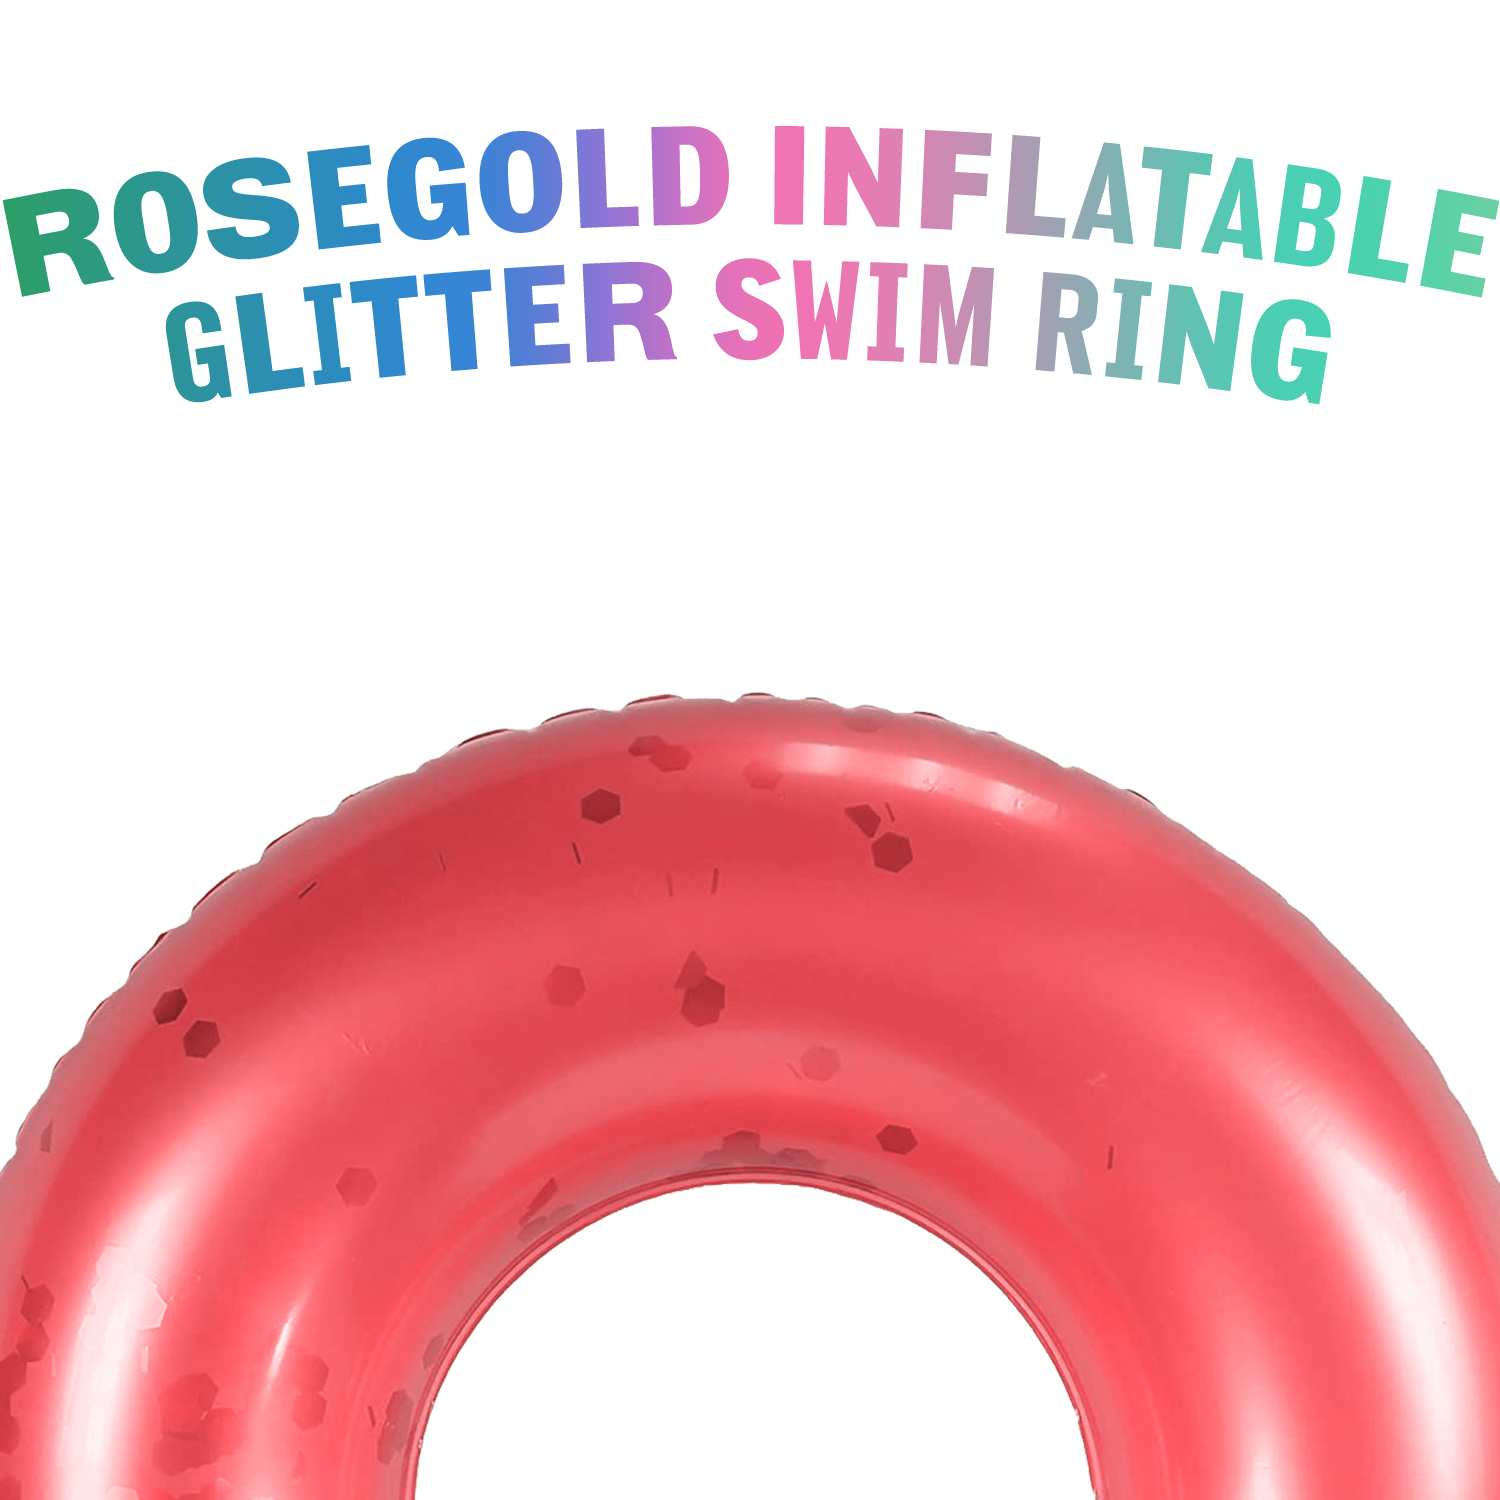 Pool Float Inflatable Floaties Glitter Sequin Pool Tube Swim Rings Pool Toys Summer Beach Toys for Adults Teenagers Girls Kids&nbsp; - image 2 of 8